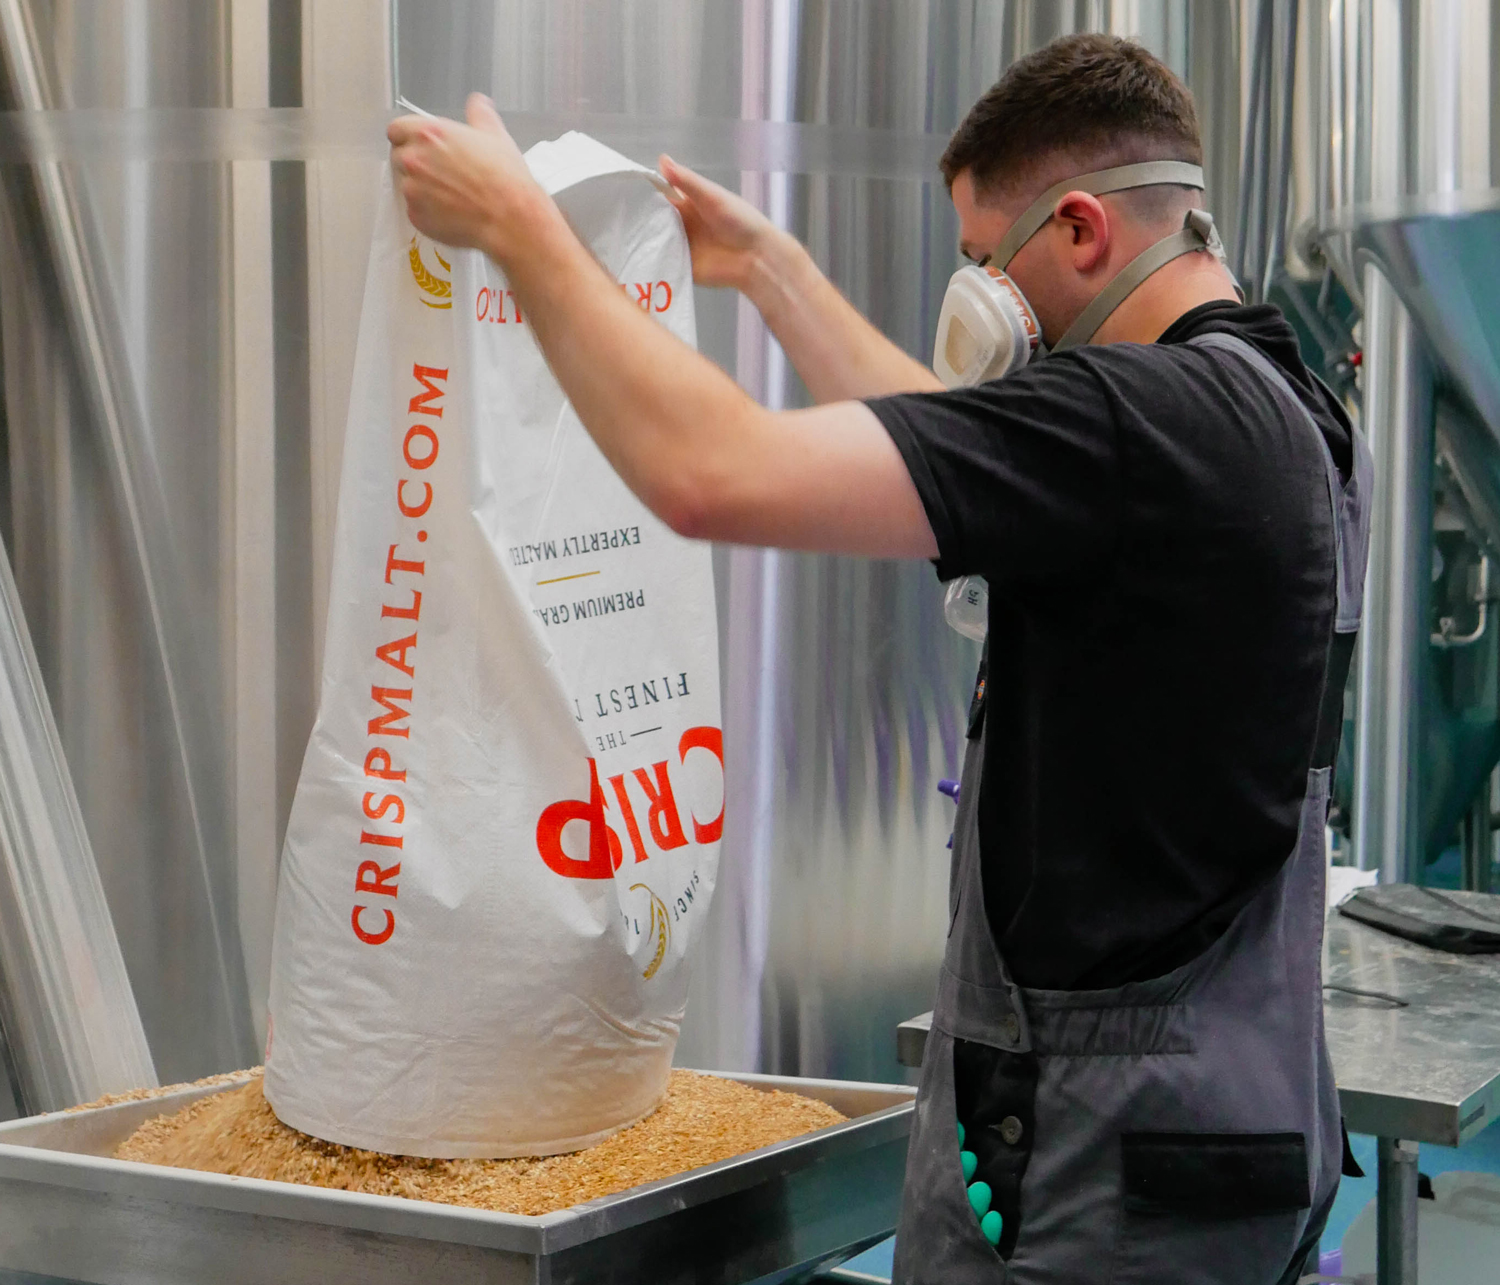 Sam Fraise from Attic Brewery tips out malt from a Crisp branded bag ready to be milled for brewing.